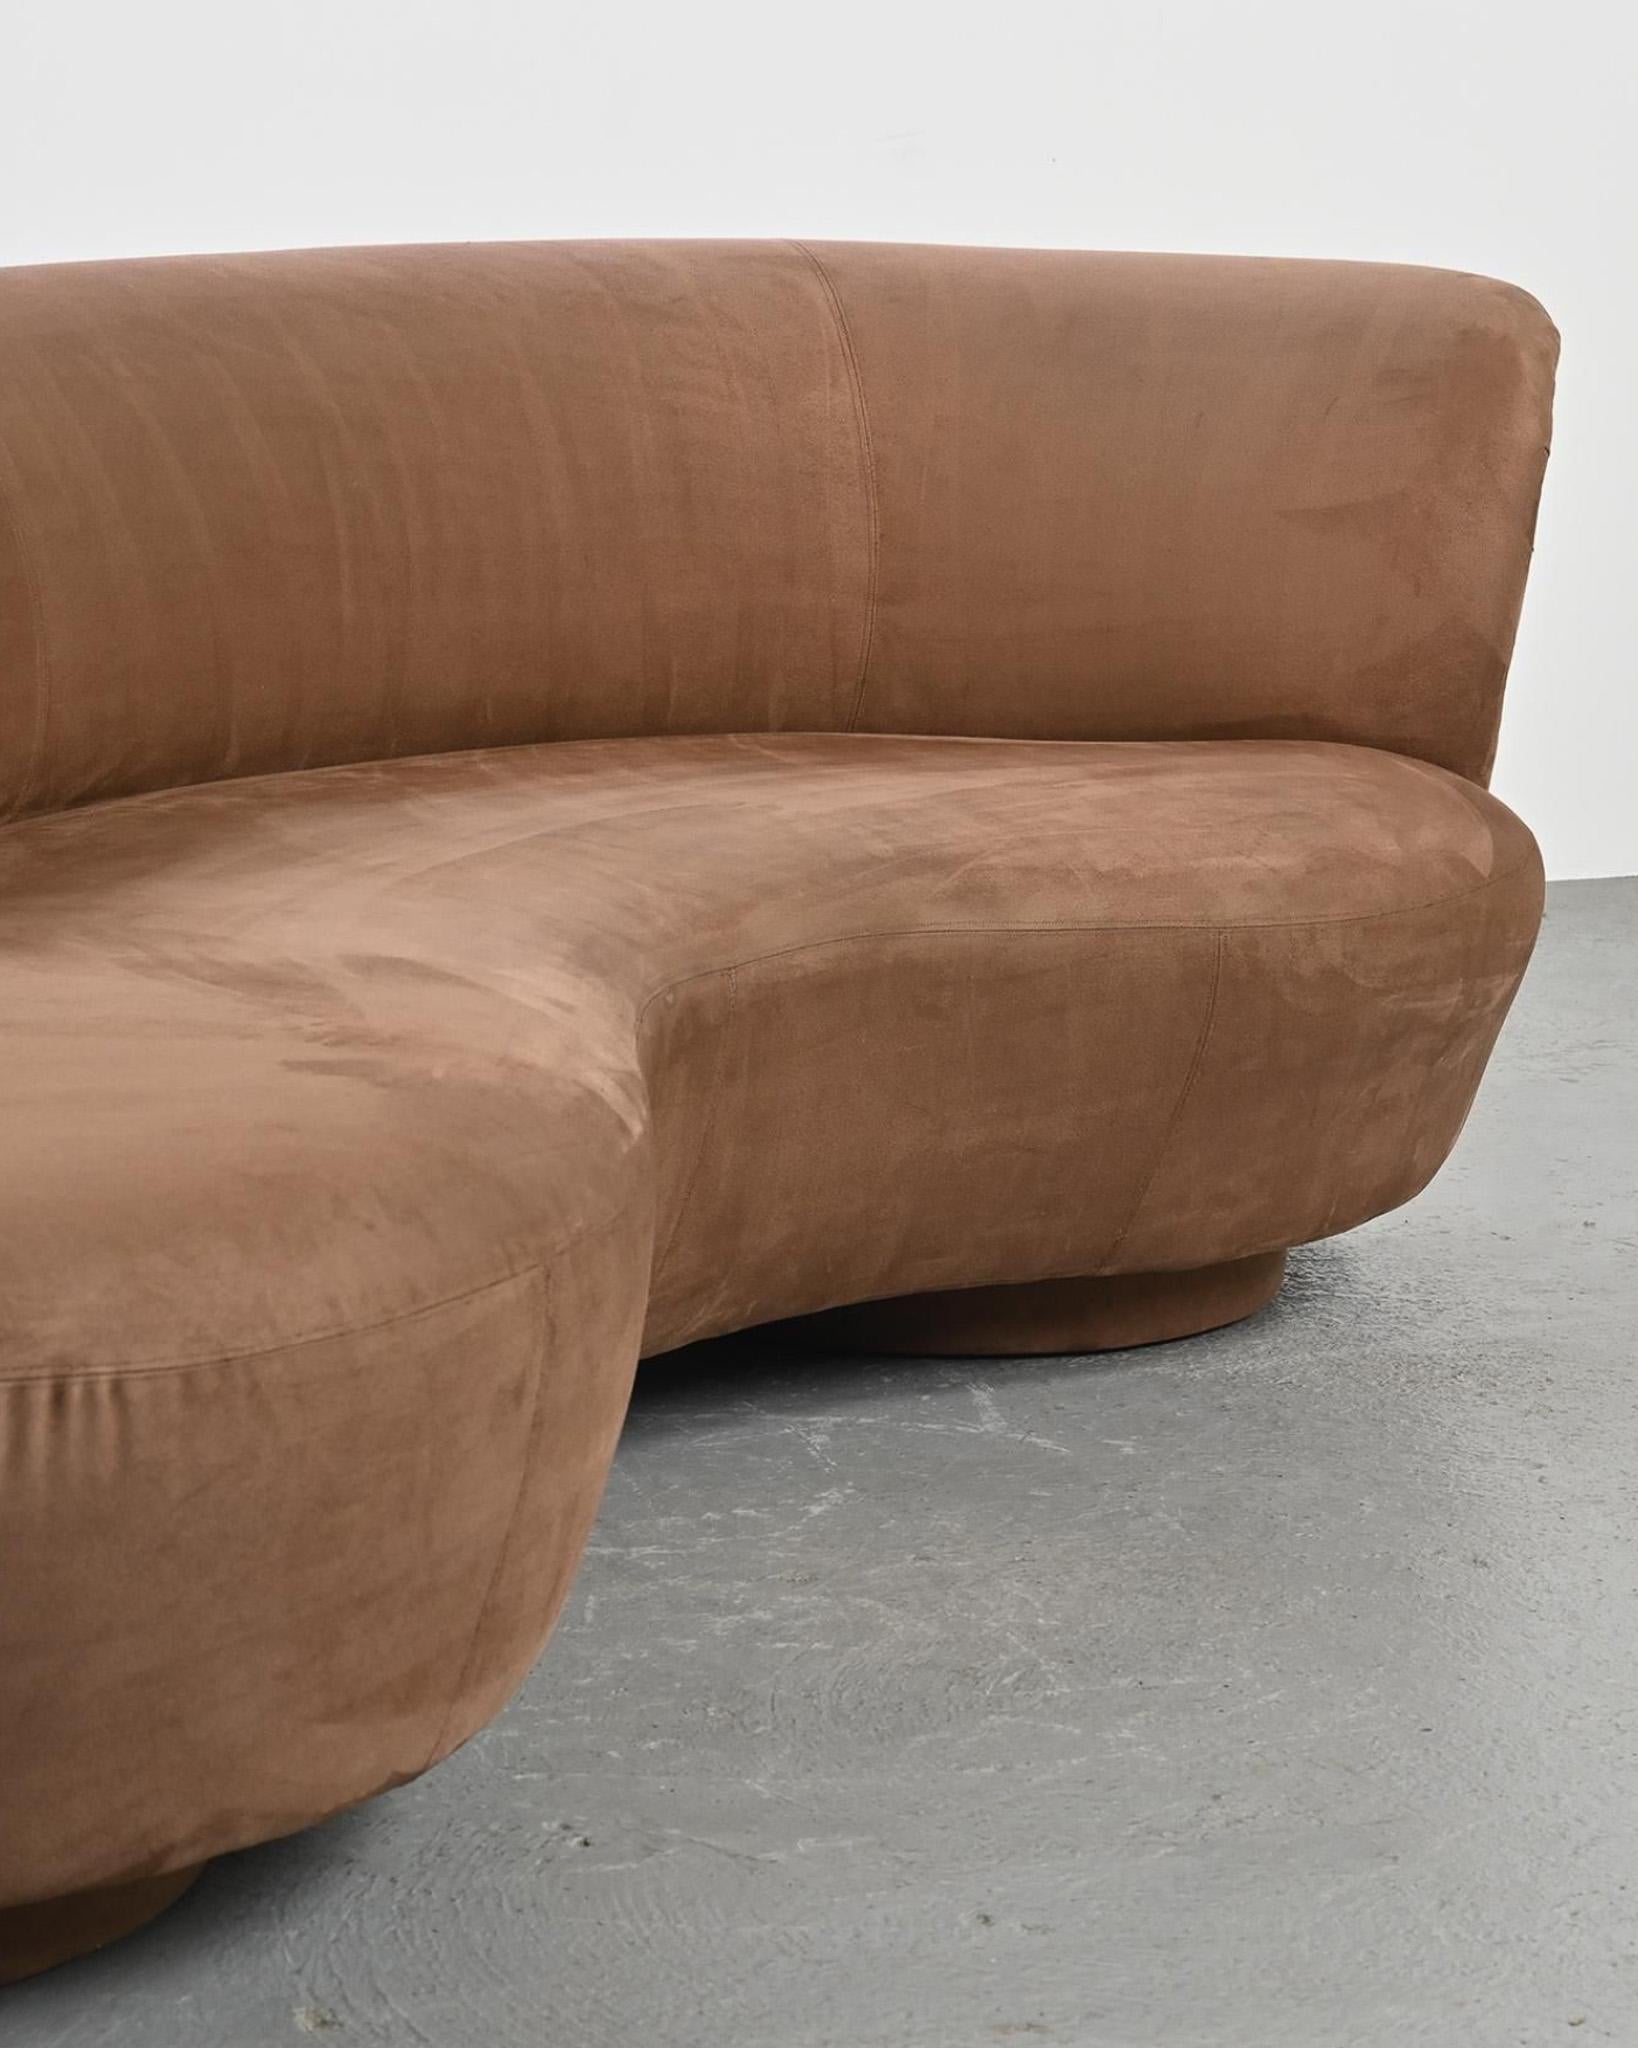 American Vladimir Kagan Curved Free Form Styled Sofa in Suede Upholstery, 1990s For Sale